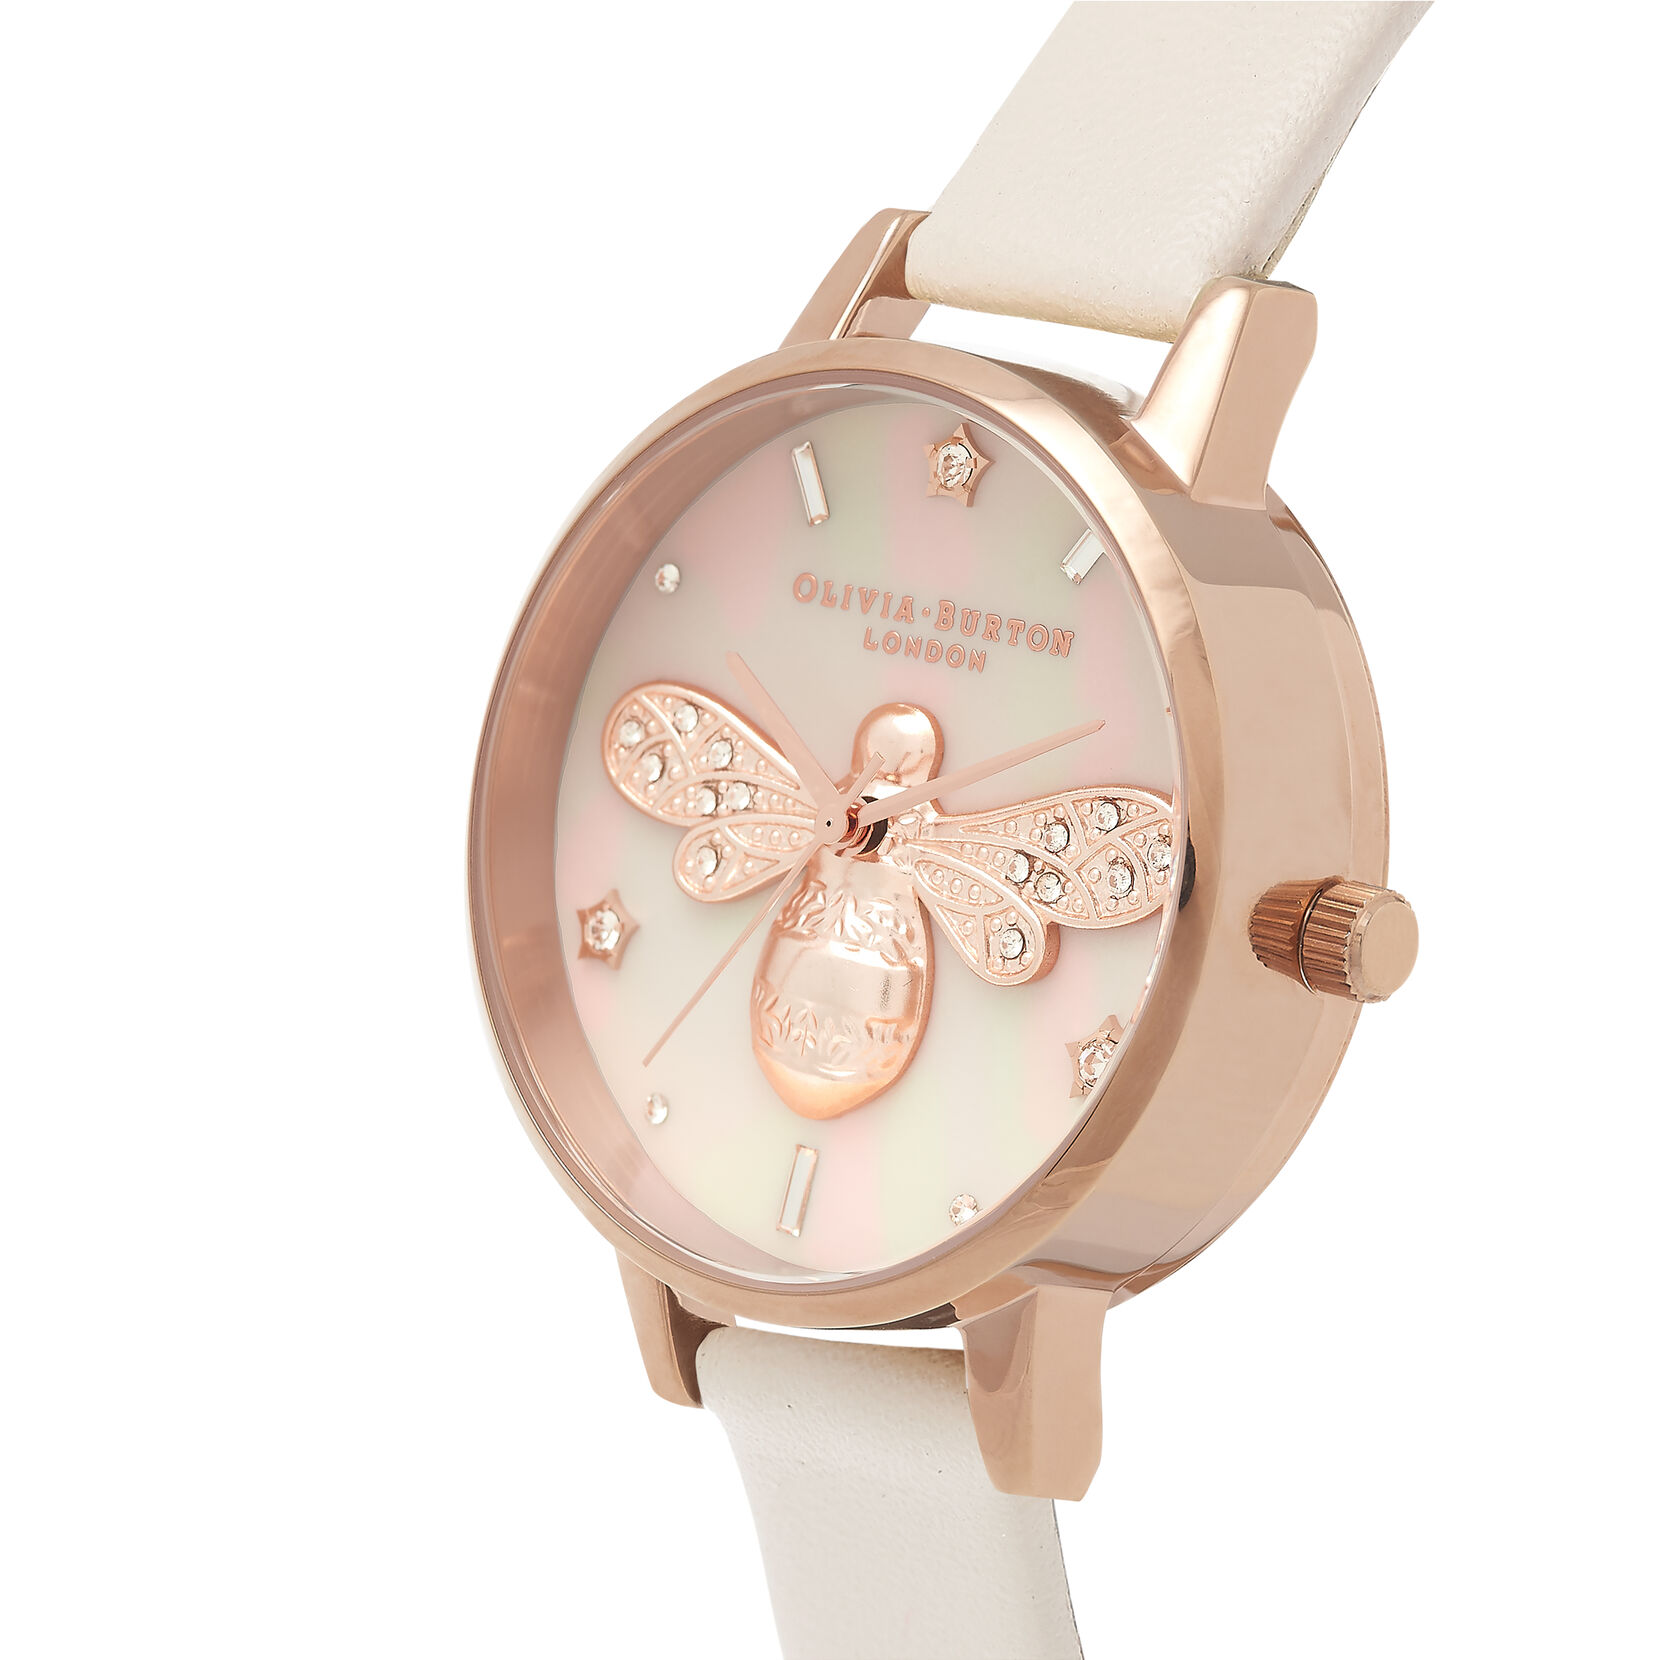 Sparkle Bee Demi Dial Blush & Rose Gold Watch